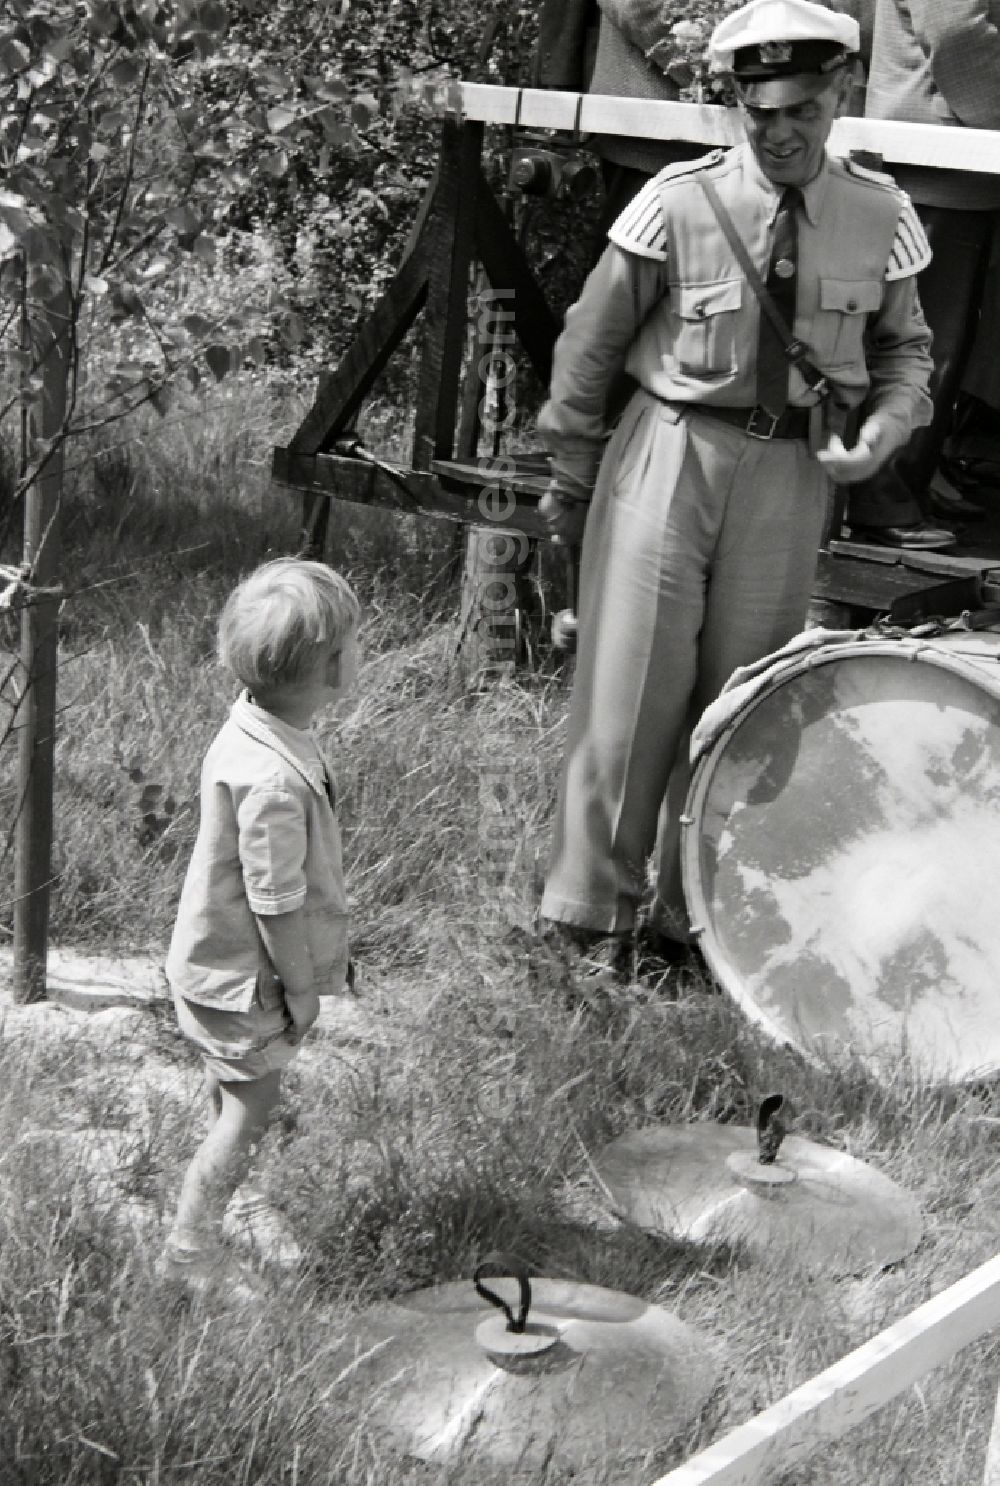 Prerow: Young boy interested in music at the summer camp Kim Ir Sen of the pioneer organization Ernst Thaelmann in Prerow in the state of Mecklenburg-Western Pomerania in the area of the former GDR, German Democratic Republic